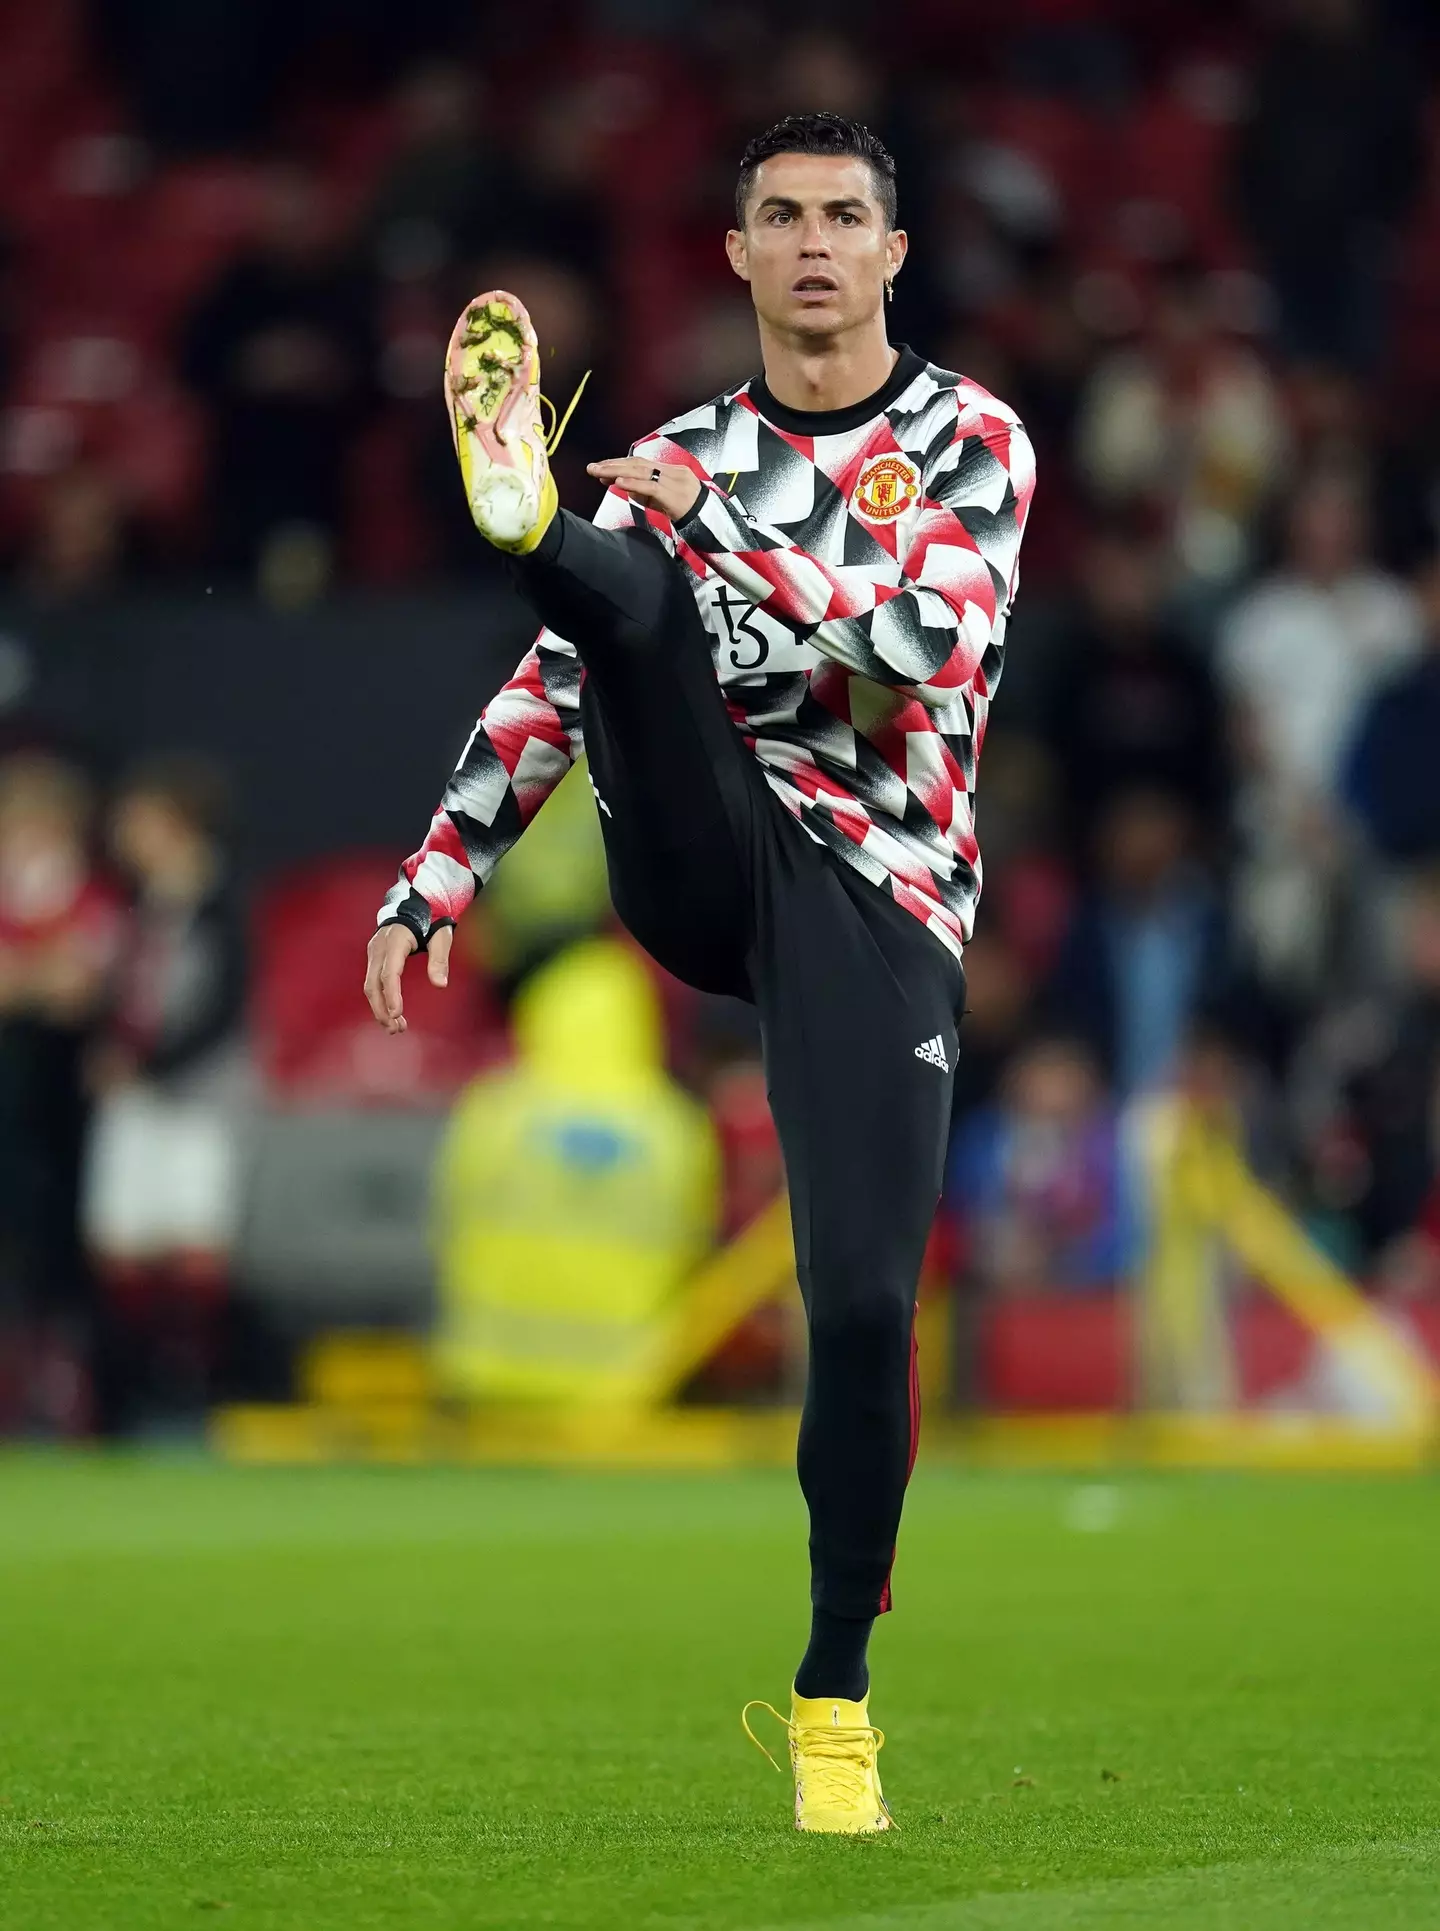 Manchester United's Cristiano Ronaldo warming up prior to kick-off during the Premier League match at Old Trafford. (Alamy)